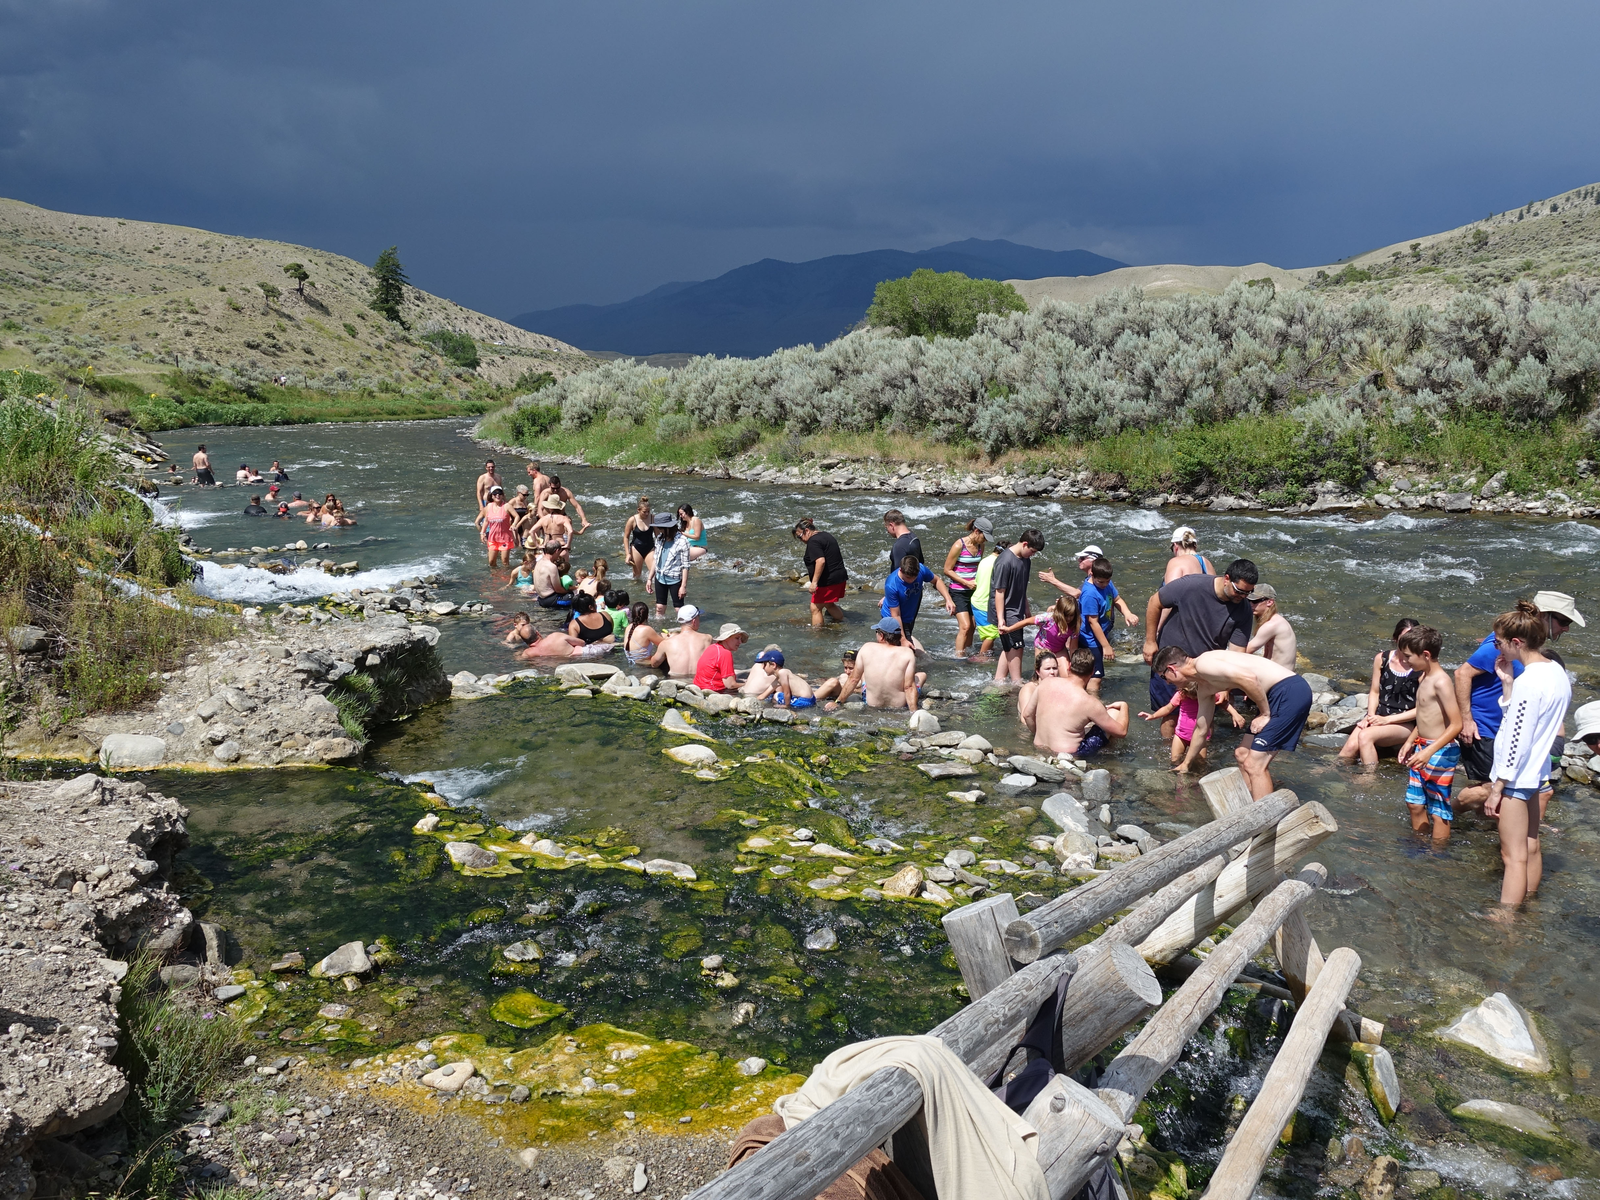 An excited group of tourist dipping at the iconic Boiling River, one of the best things to do in Montana, with algae covered rocks